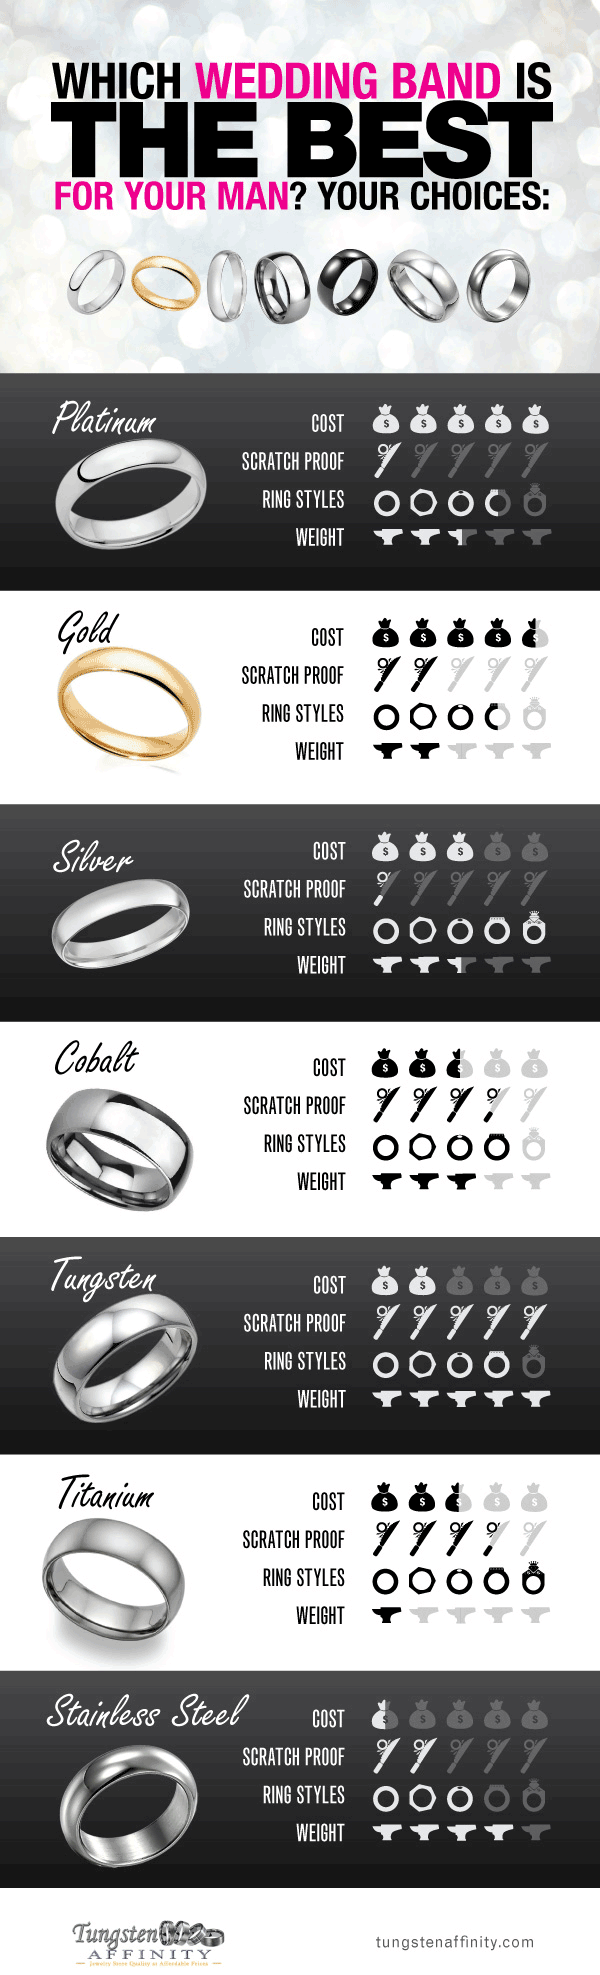 Menstruatie Kansen Stevig Find out What Metal is the Best for Your Man's Wedding Band!